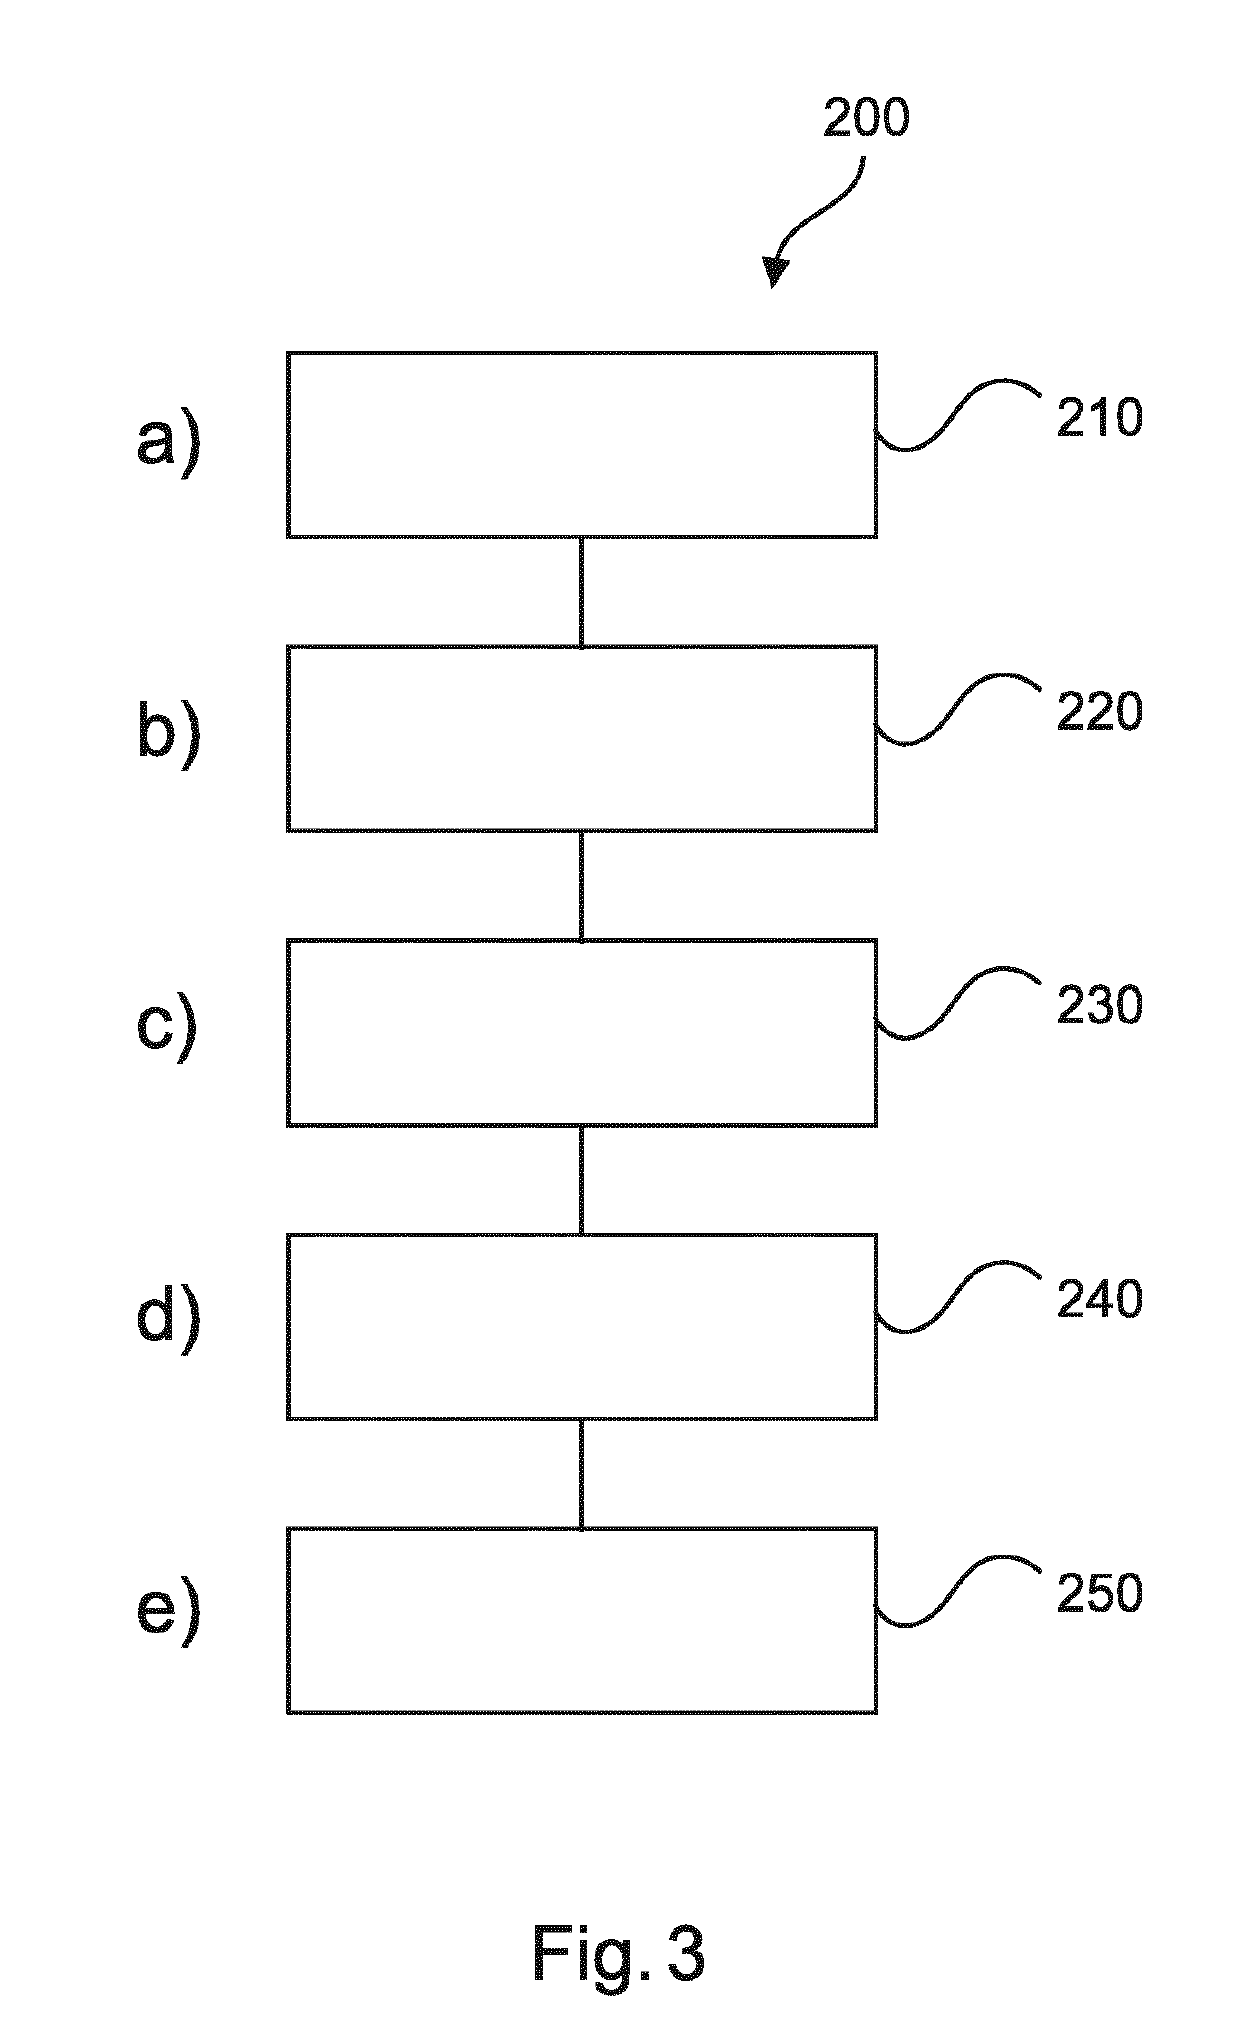 Apparatus for determining cellular composition information in one or more tissue samples